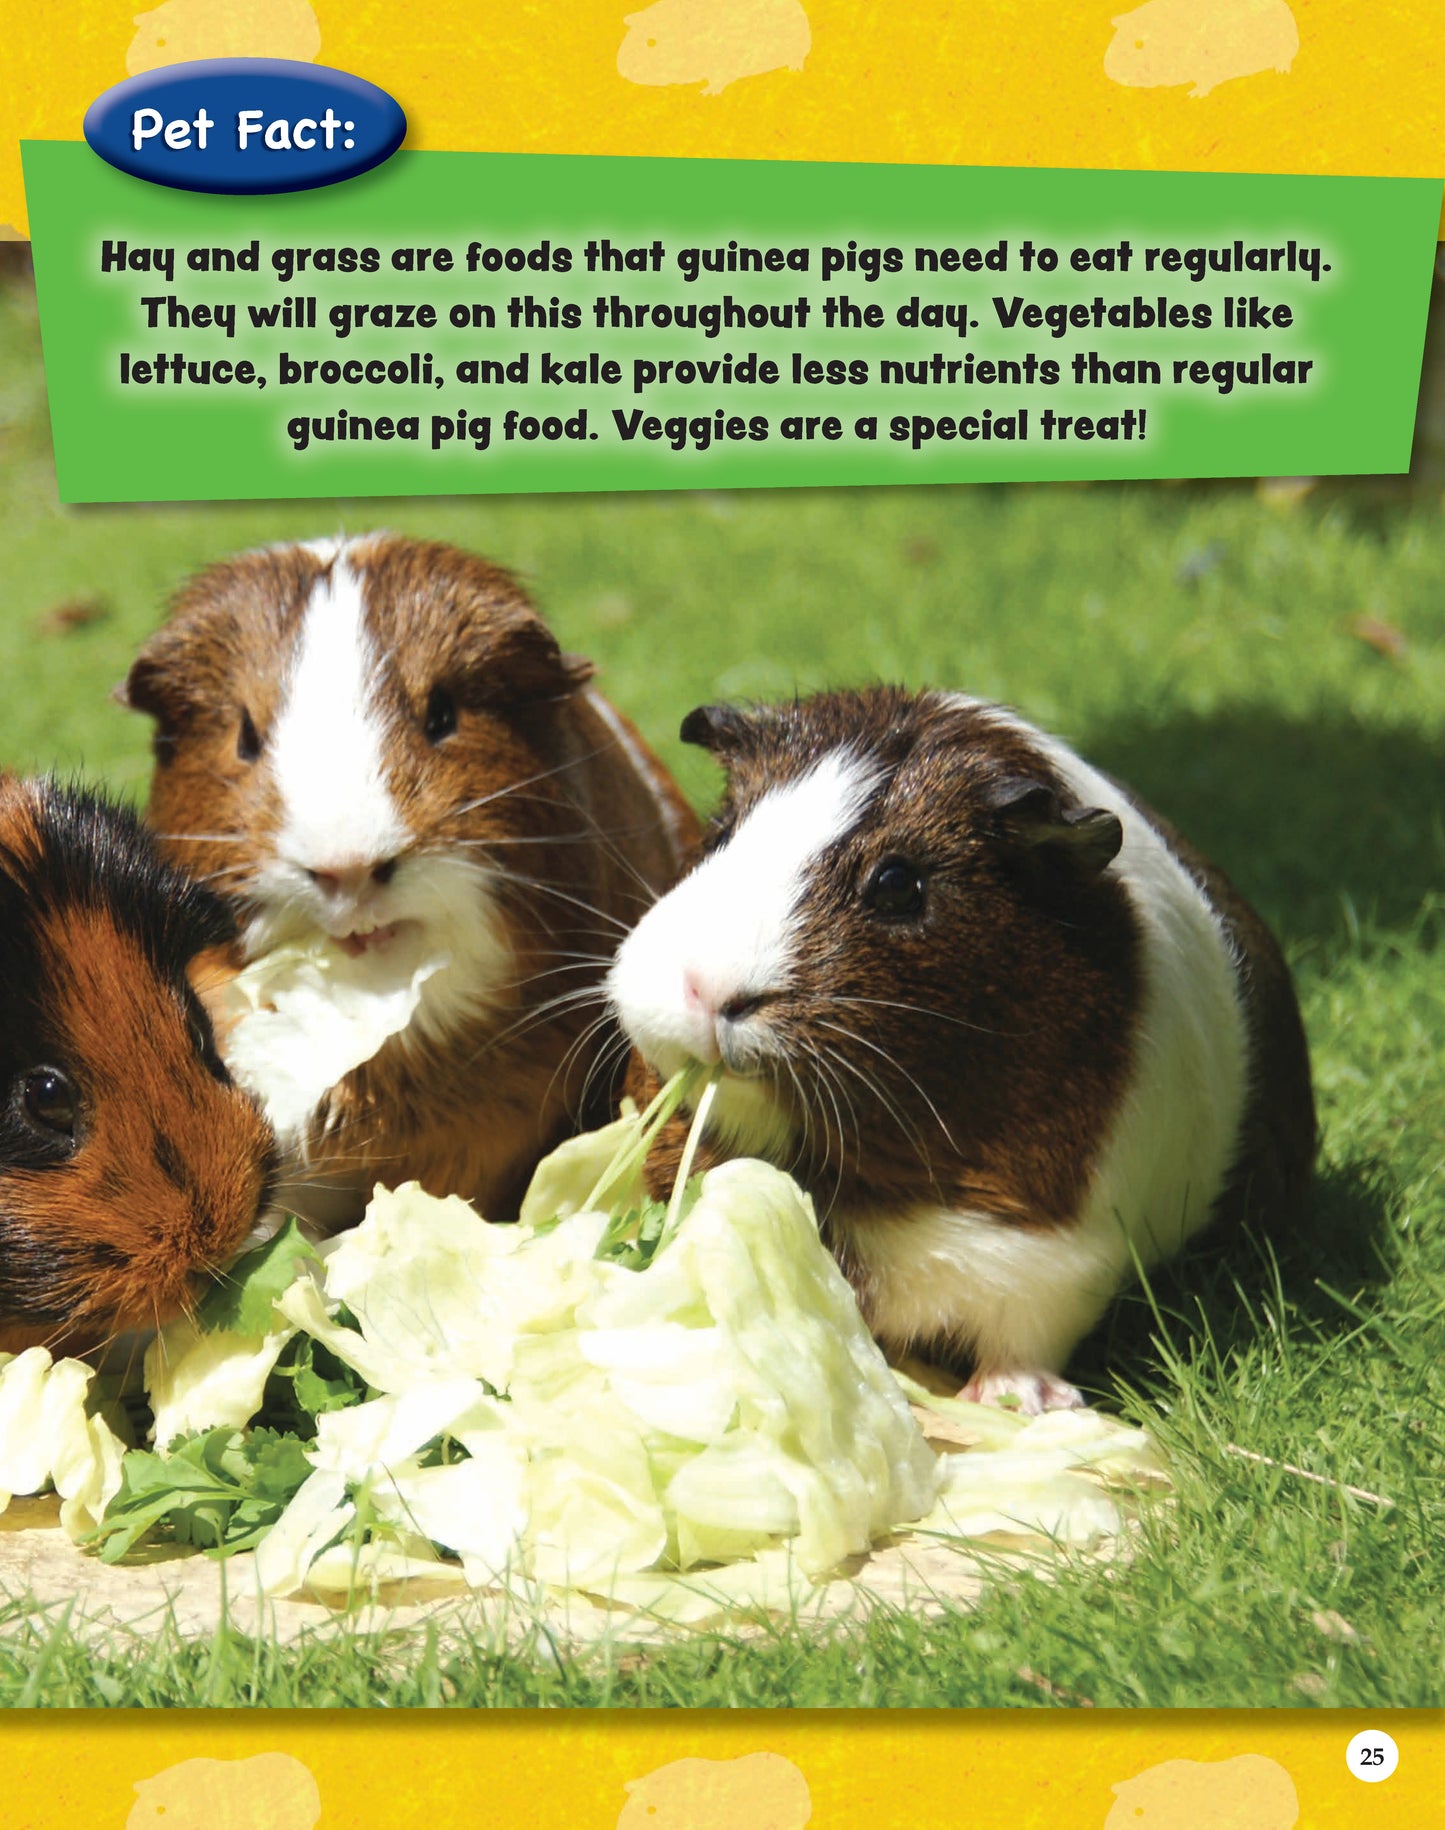 If Animals Could Talk: Guinea Pigs (SC)